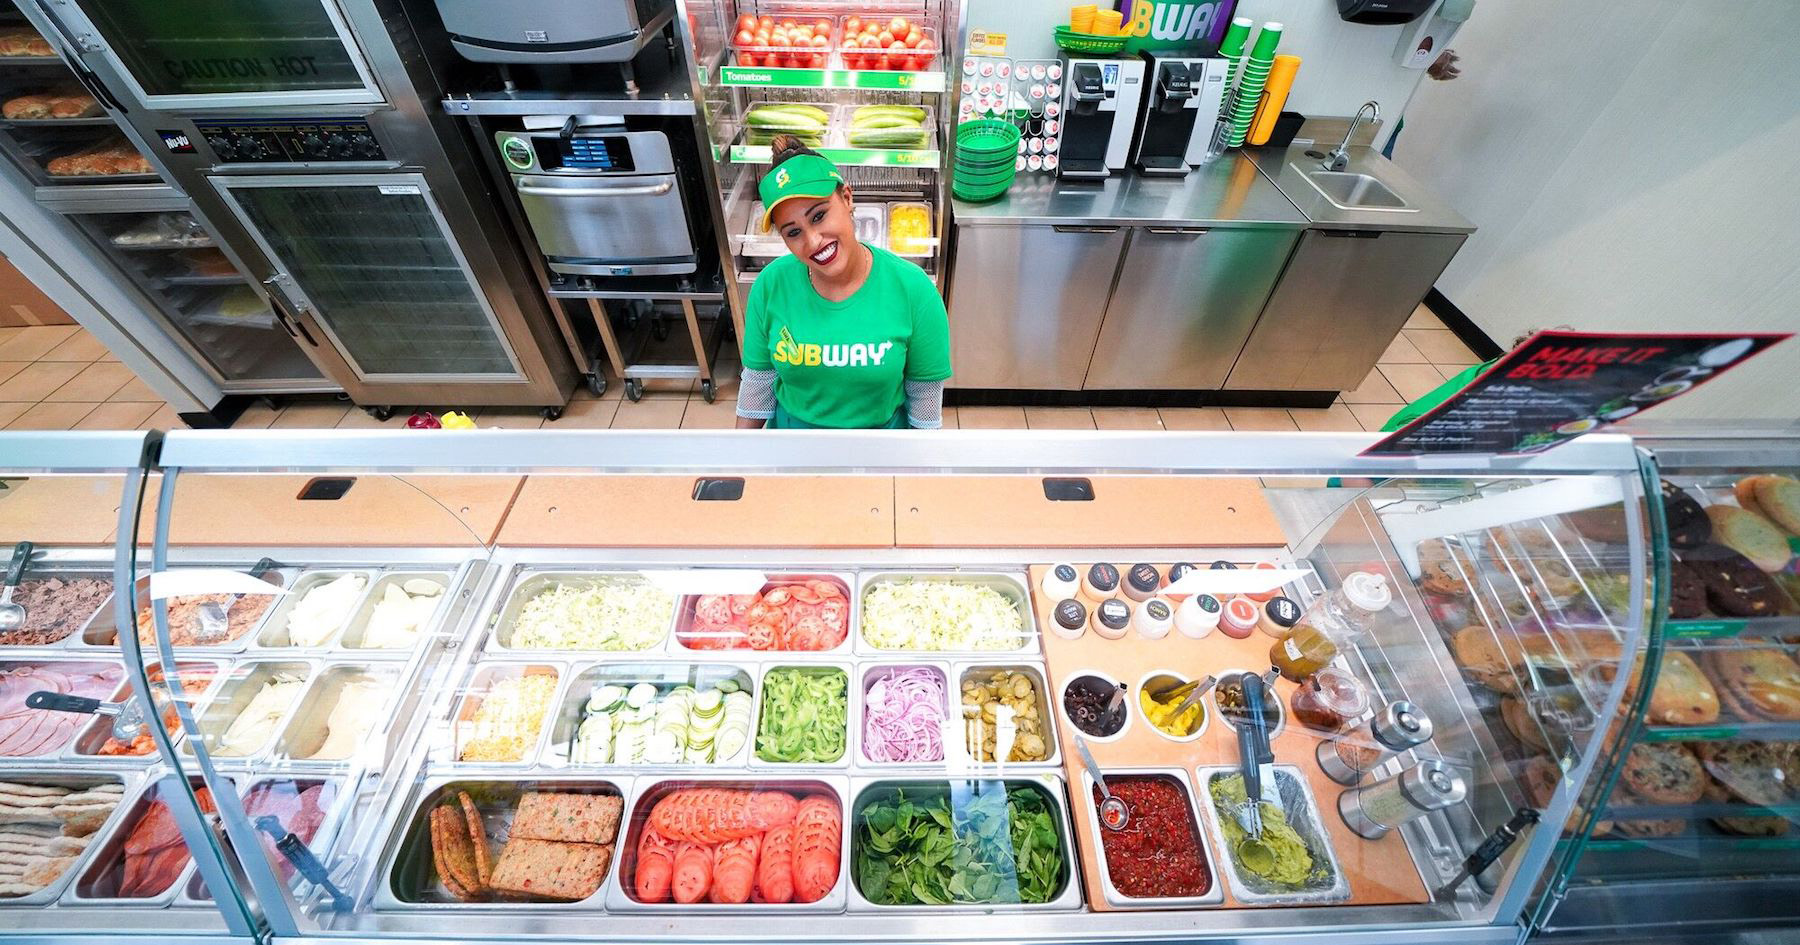 How Old Do You Have to be to Work at Subway